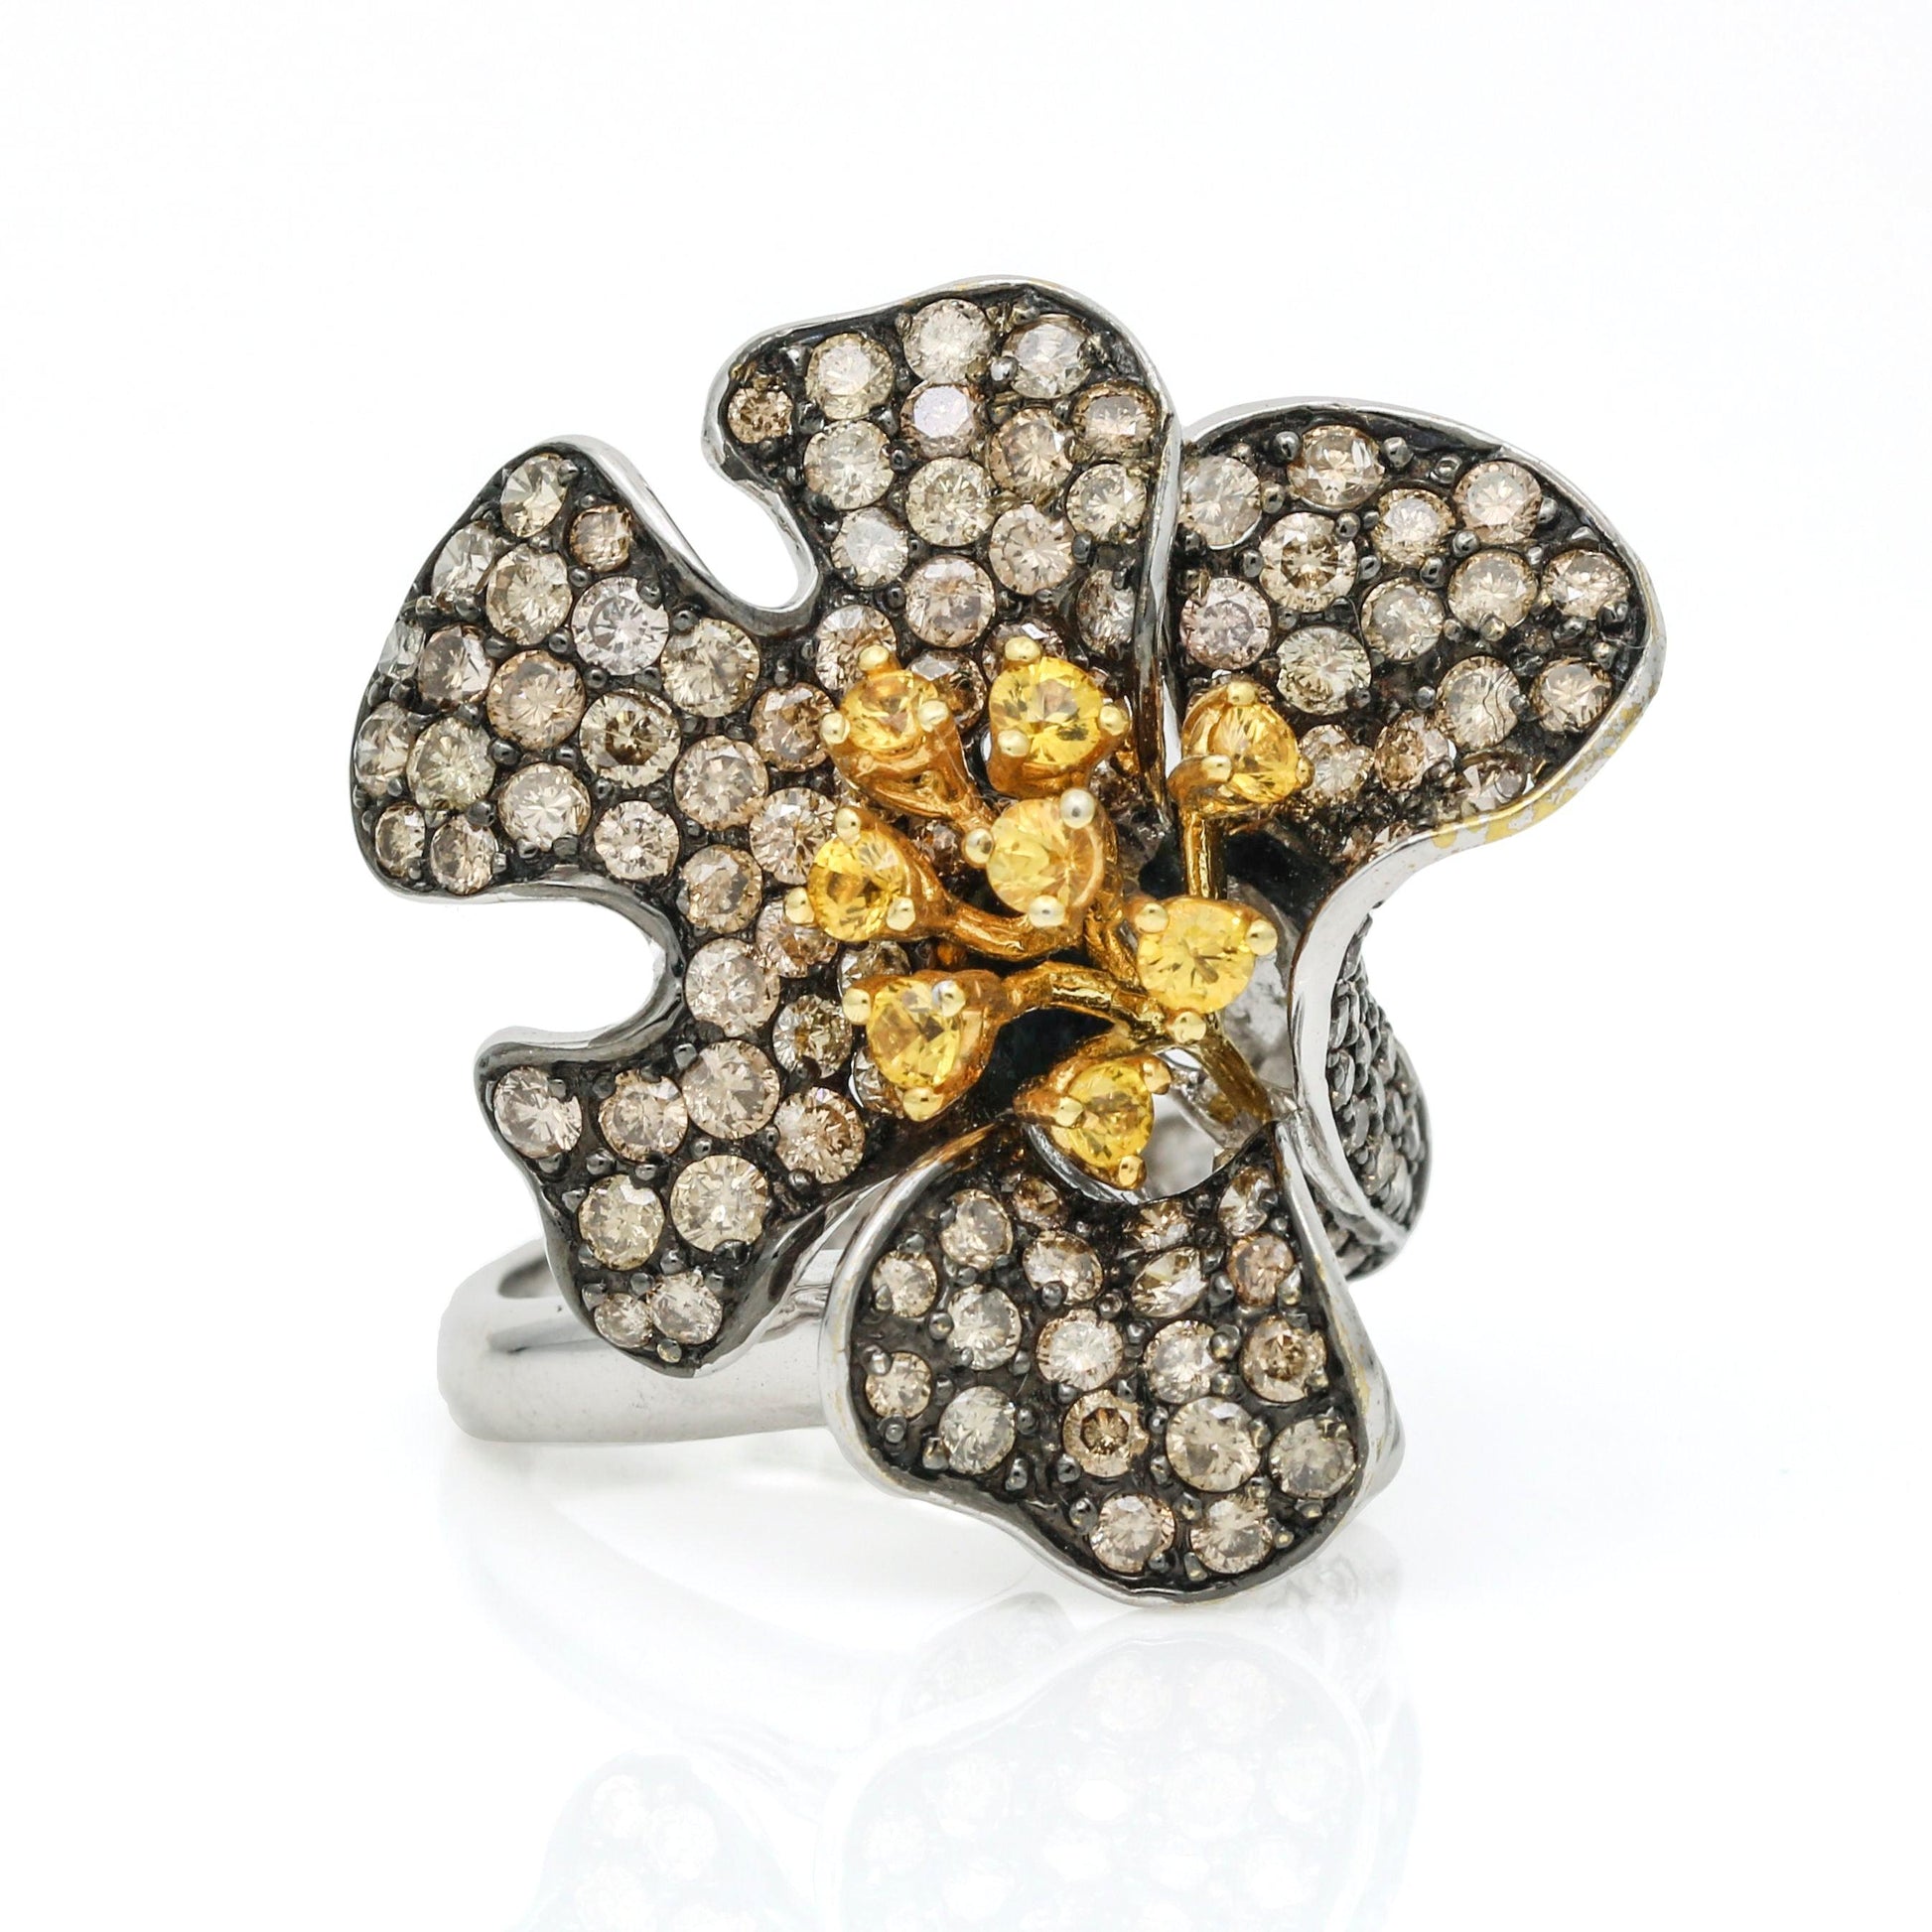 Pave Brown Diamonds & Yellow Sapphire Flower Statement Ring in 14k White Gold - 31 Jewels Inc.